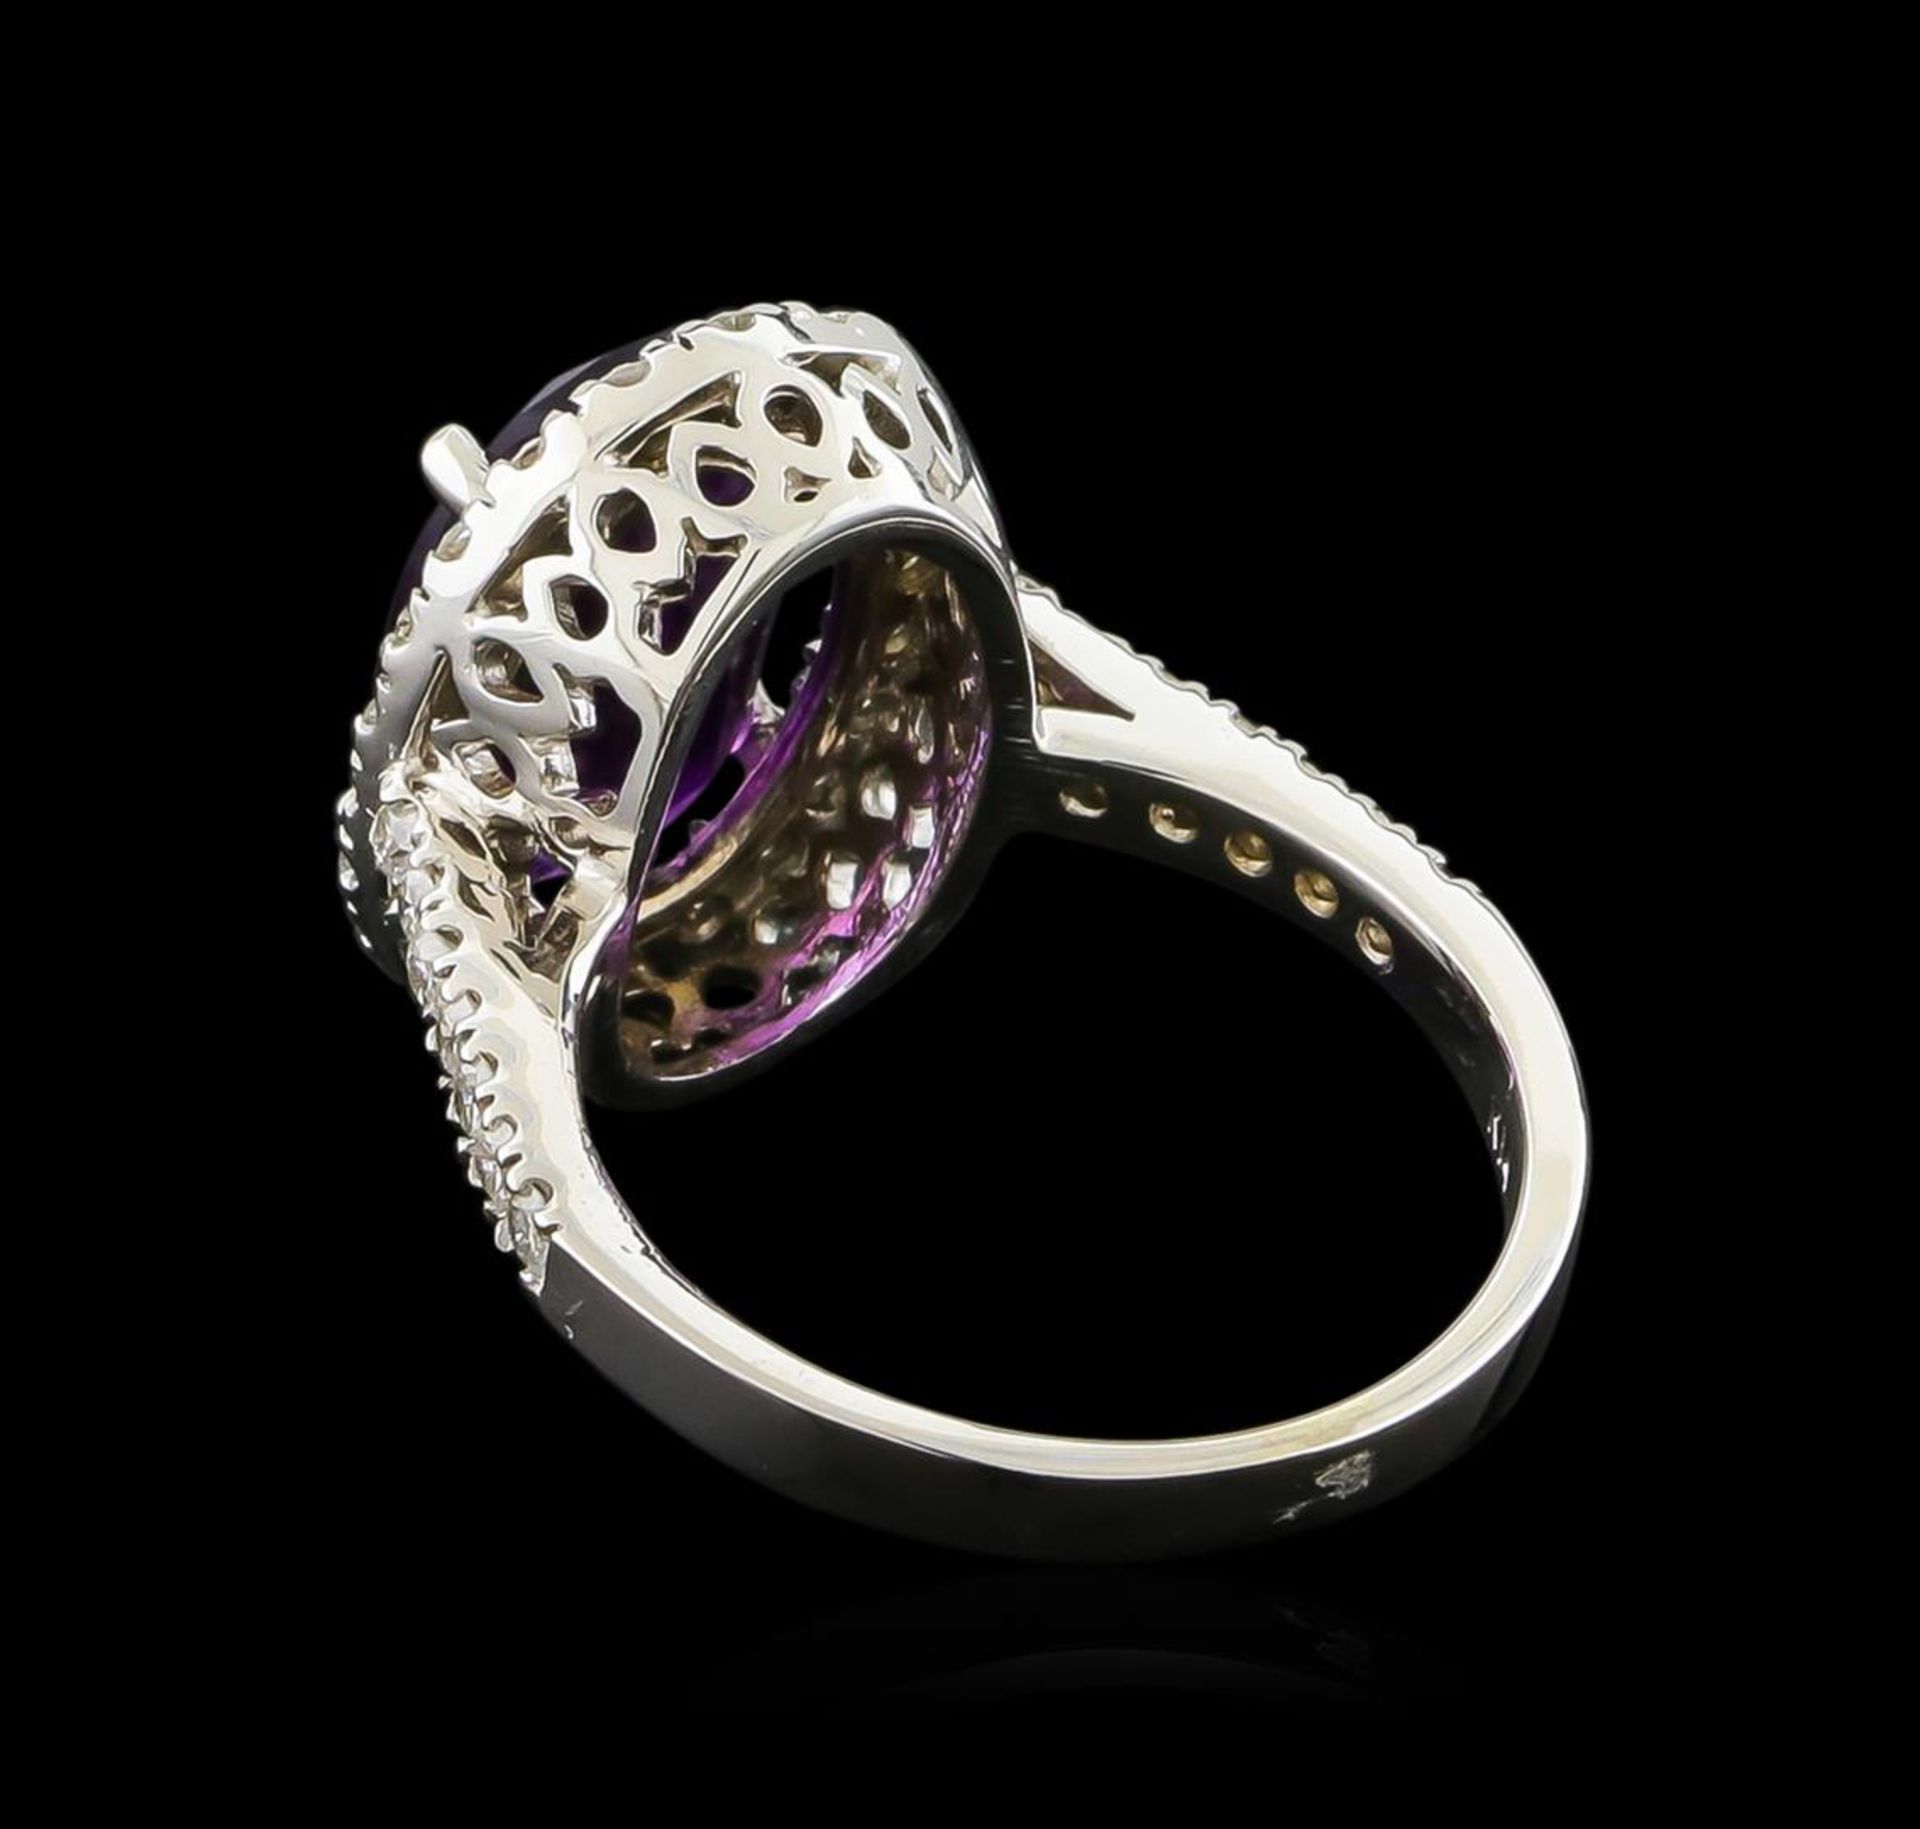 3.58ct Amethyst and Diamond Ring - 14KT White Gold - Image 3 of 4